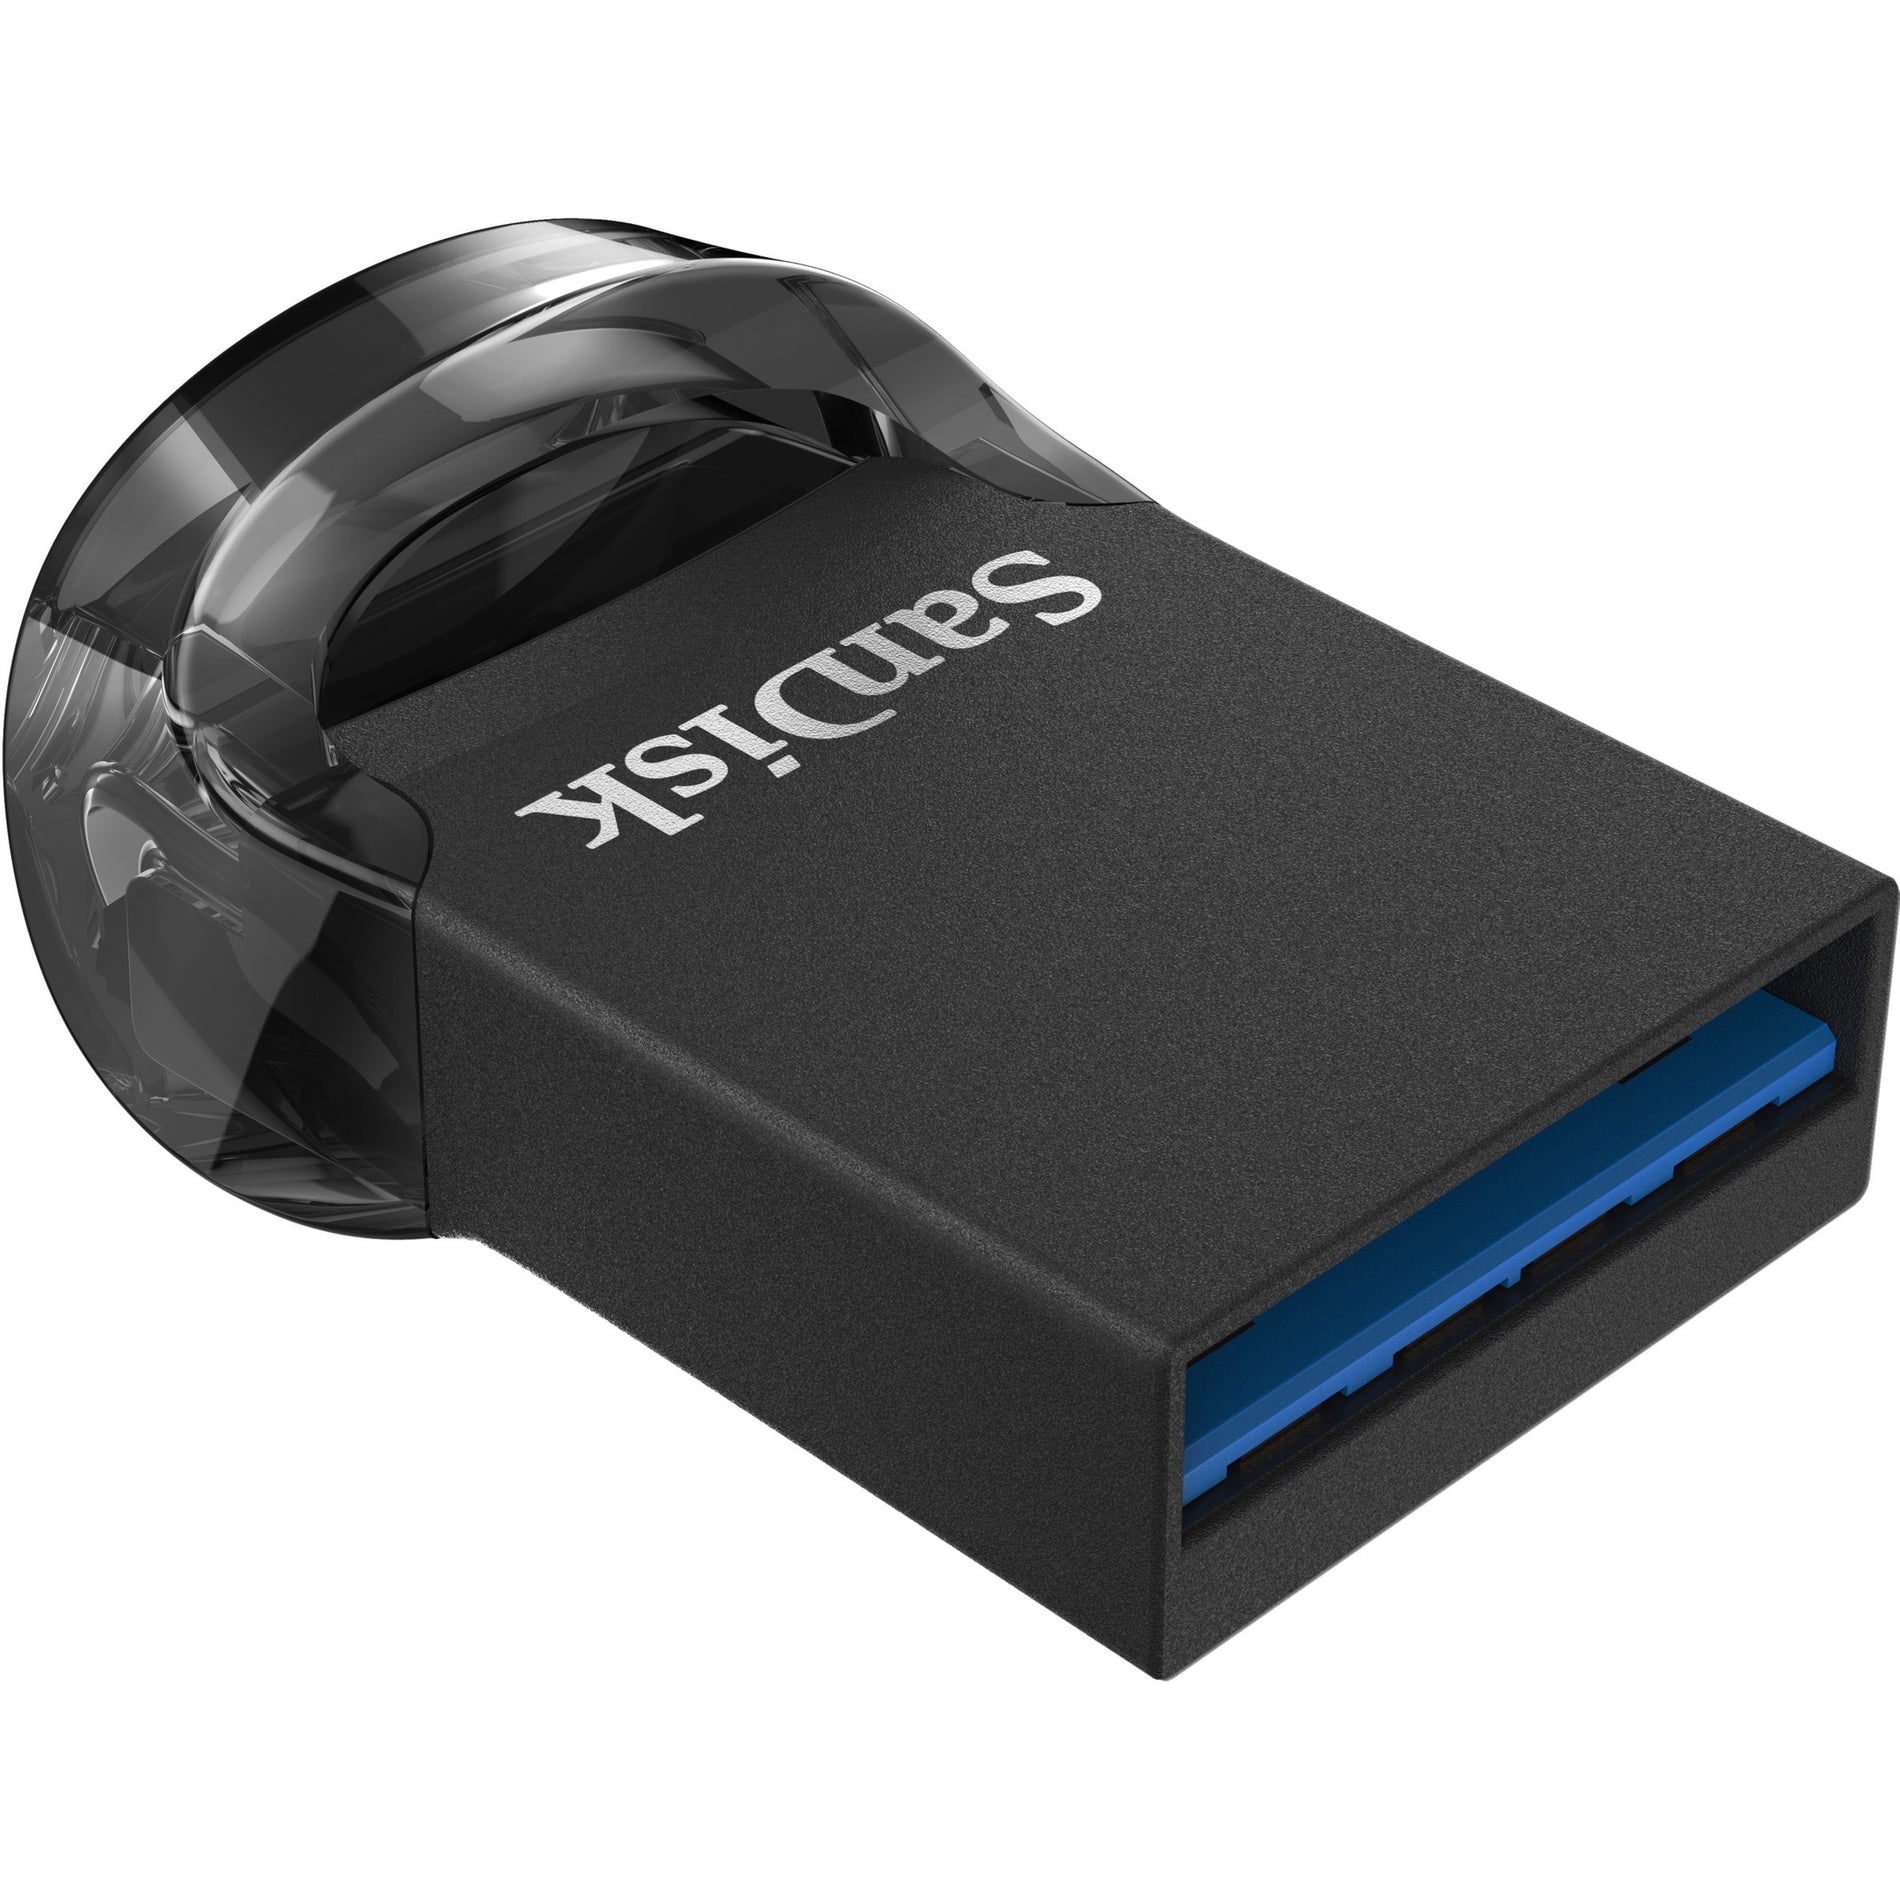 SanDisk SDCZ430-032G-A46 Ultra Fit USB 3.1 Flash Drive 32GB, High-Speed Data Transfer and Compact Design